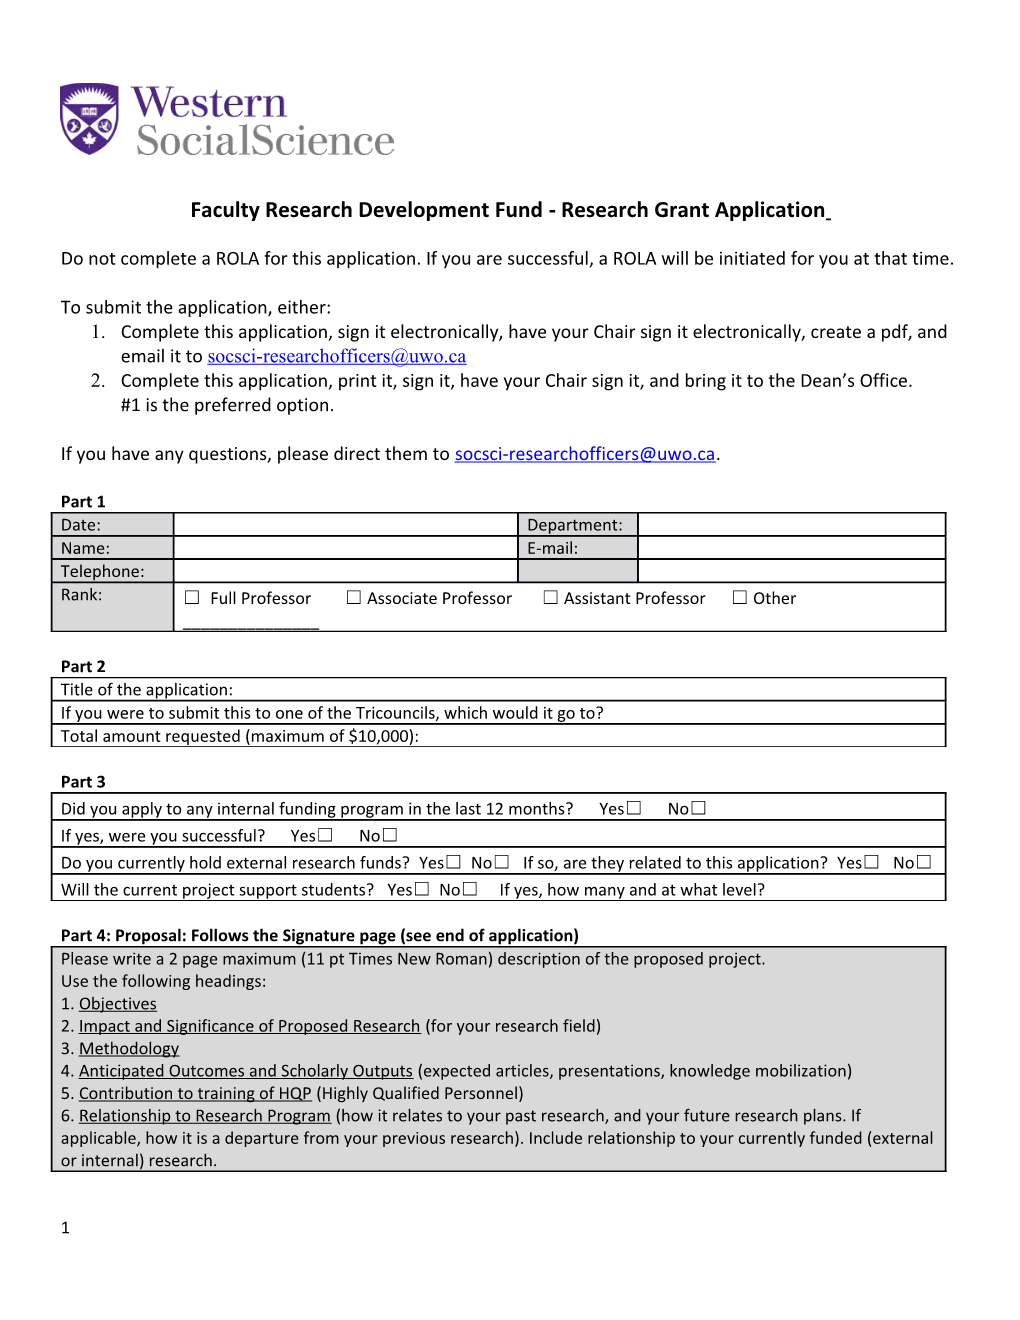 Faculty Research Development Fund- Research Grant Application